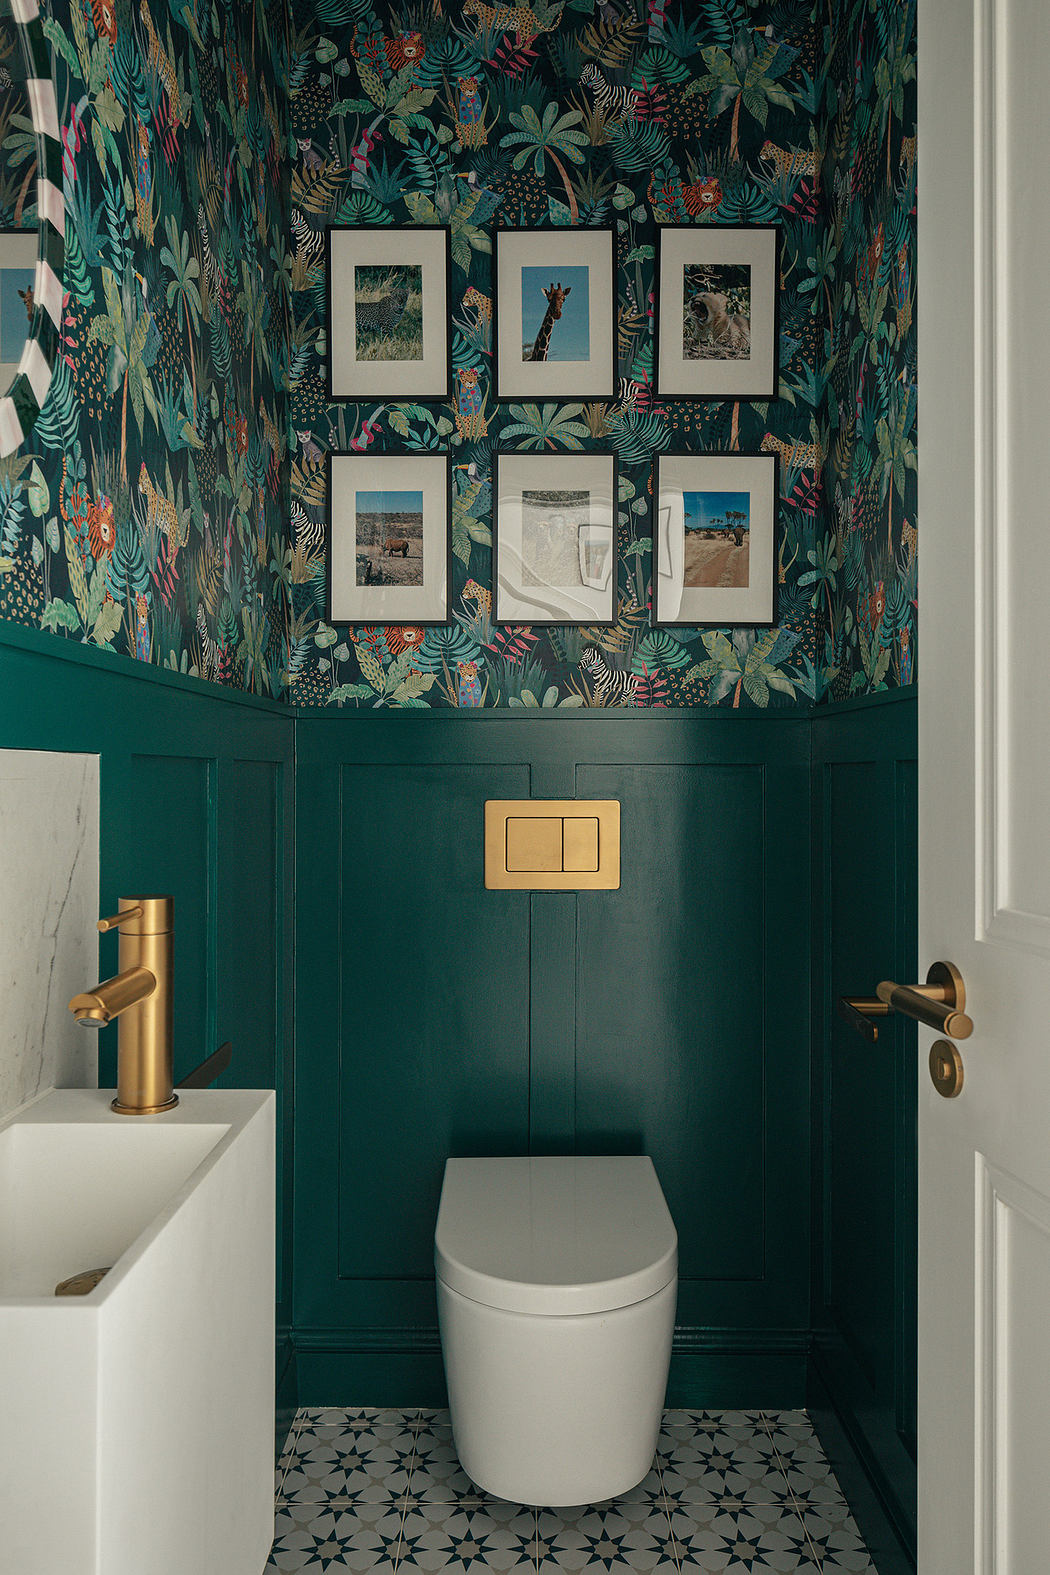 Small bathroom with tropical wallpaper, green wainscoting, and gold fixtures.